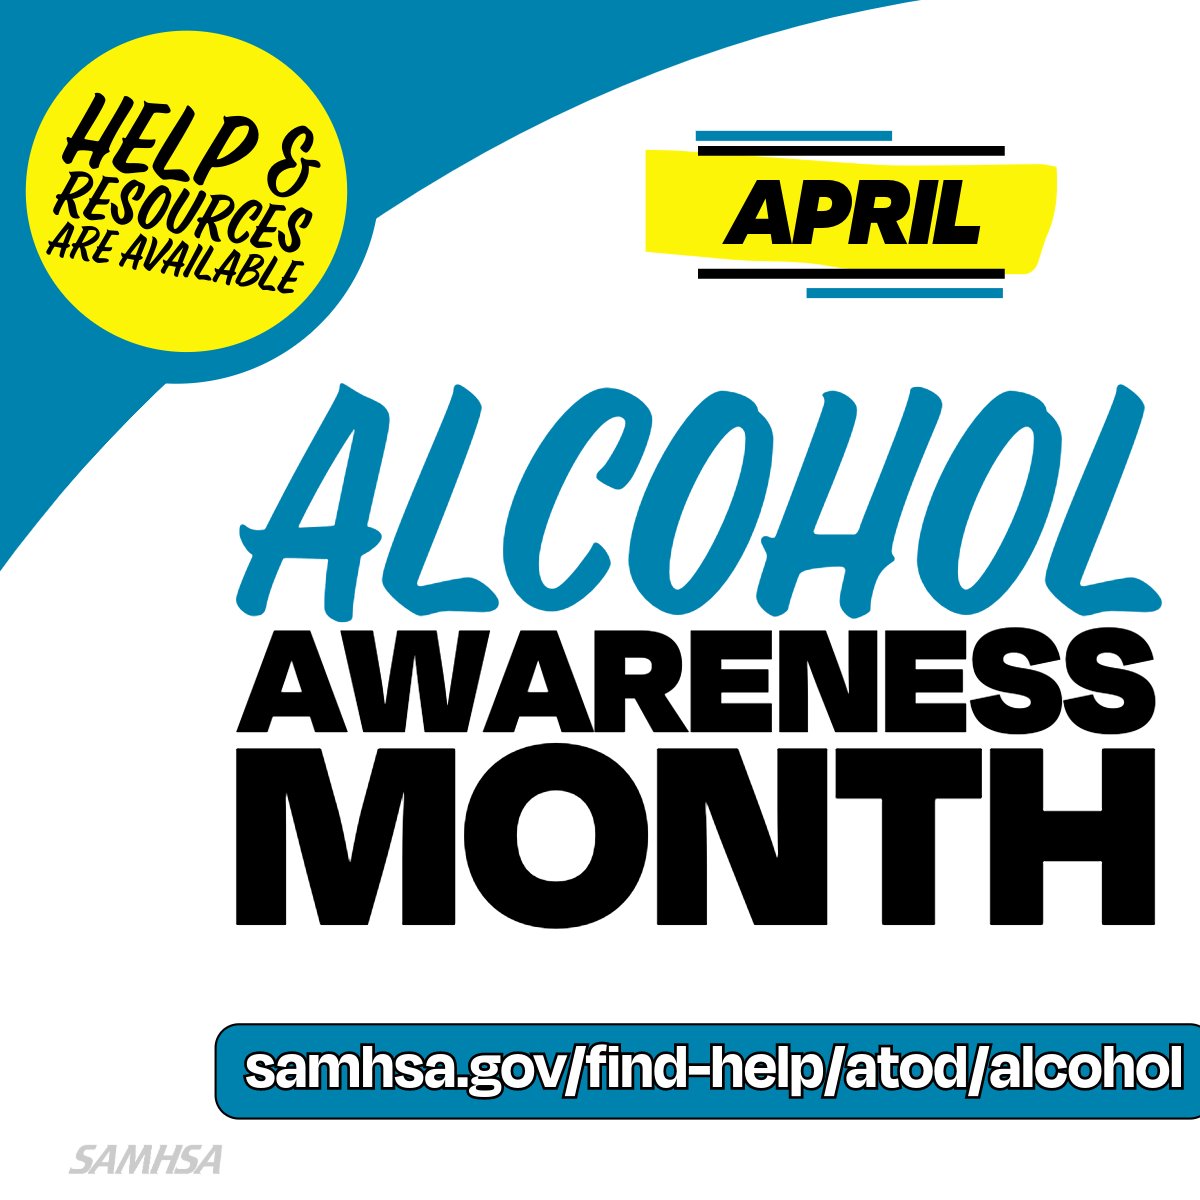 April is #AlcoholAwarenessMonth—a time to raise awareness of alcohol use & misuse. Find helpful resources on alcohol use & misuse prevention, treatment & recovery support services that can be used to support those who may be struggling: samhsa.gov/find-help/atod….